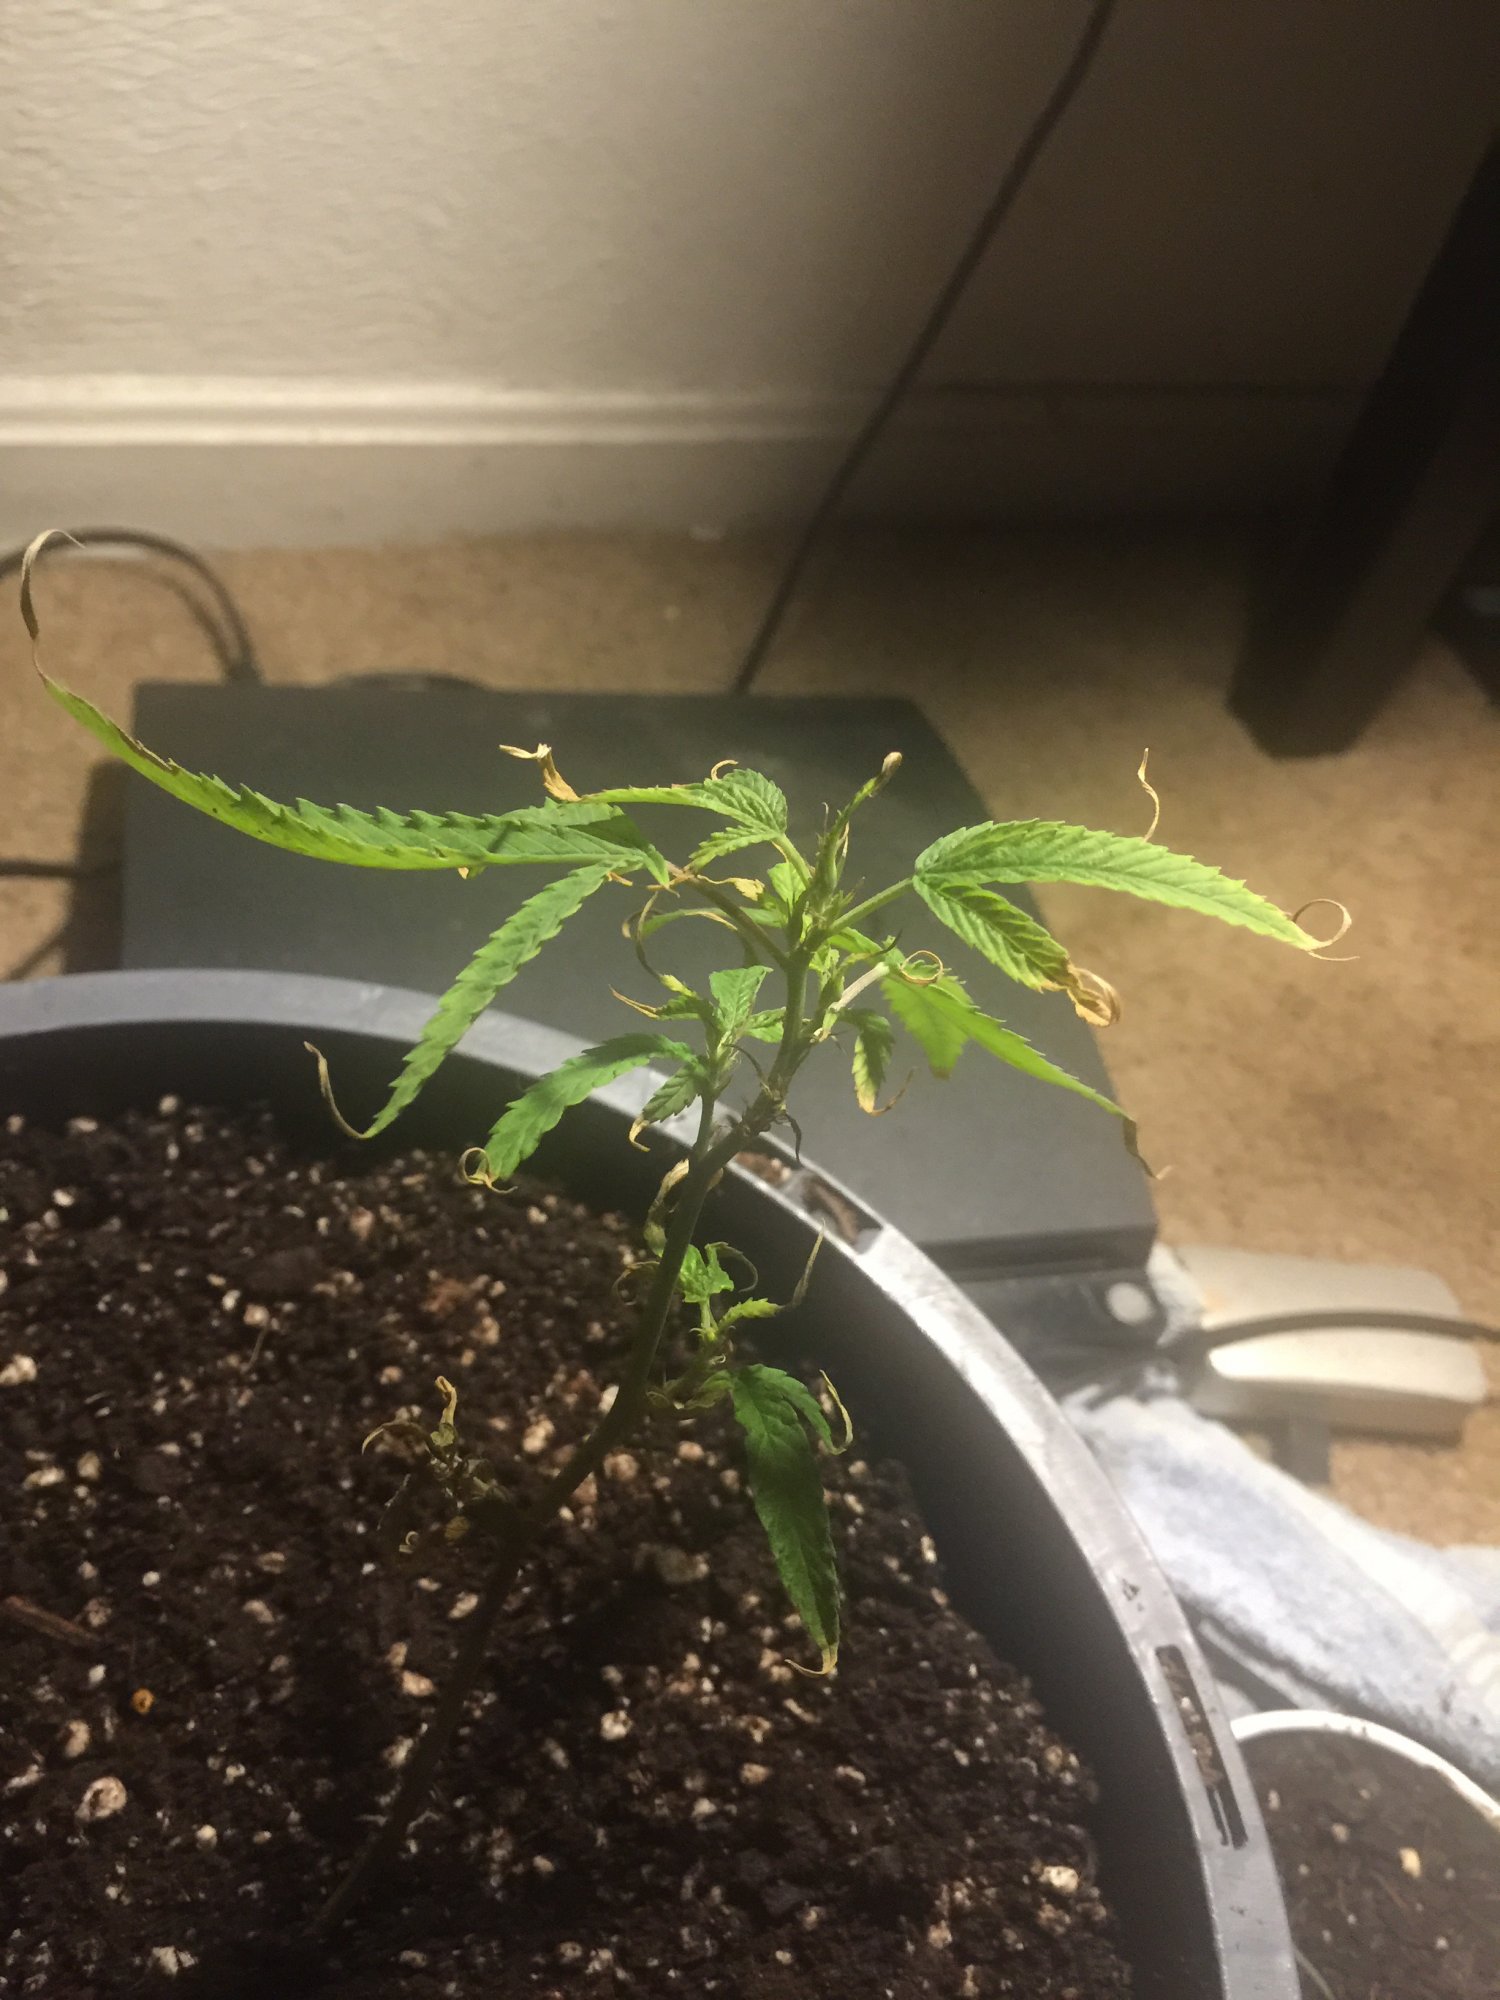 Update on my clones that i still need help with 3